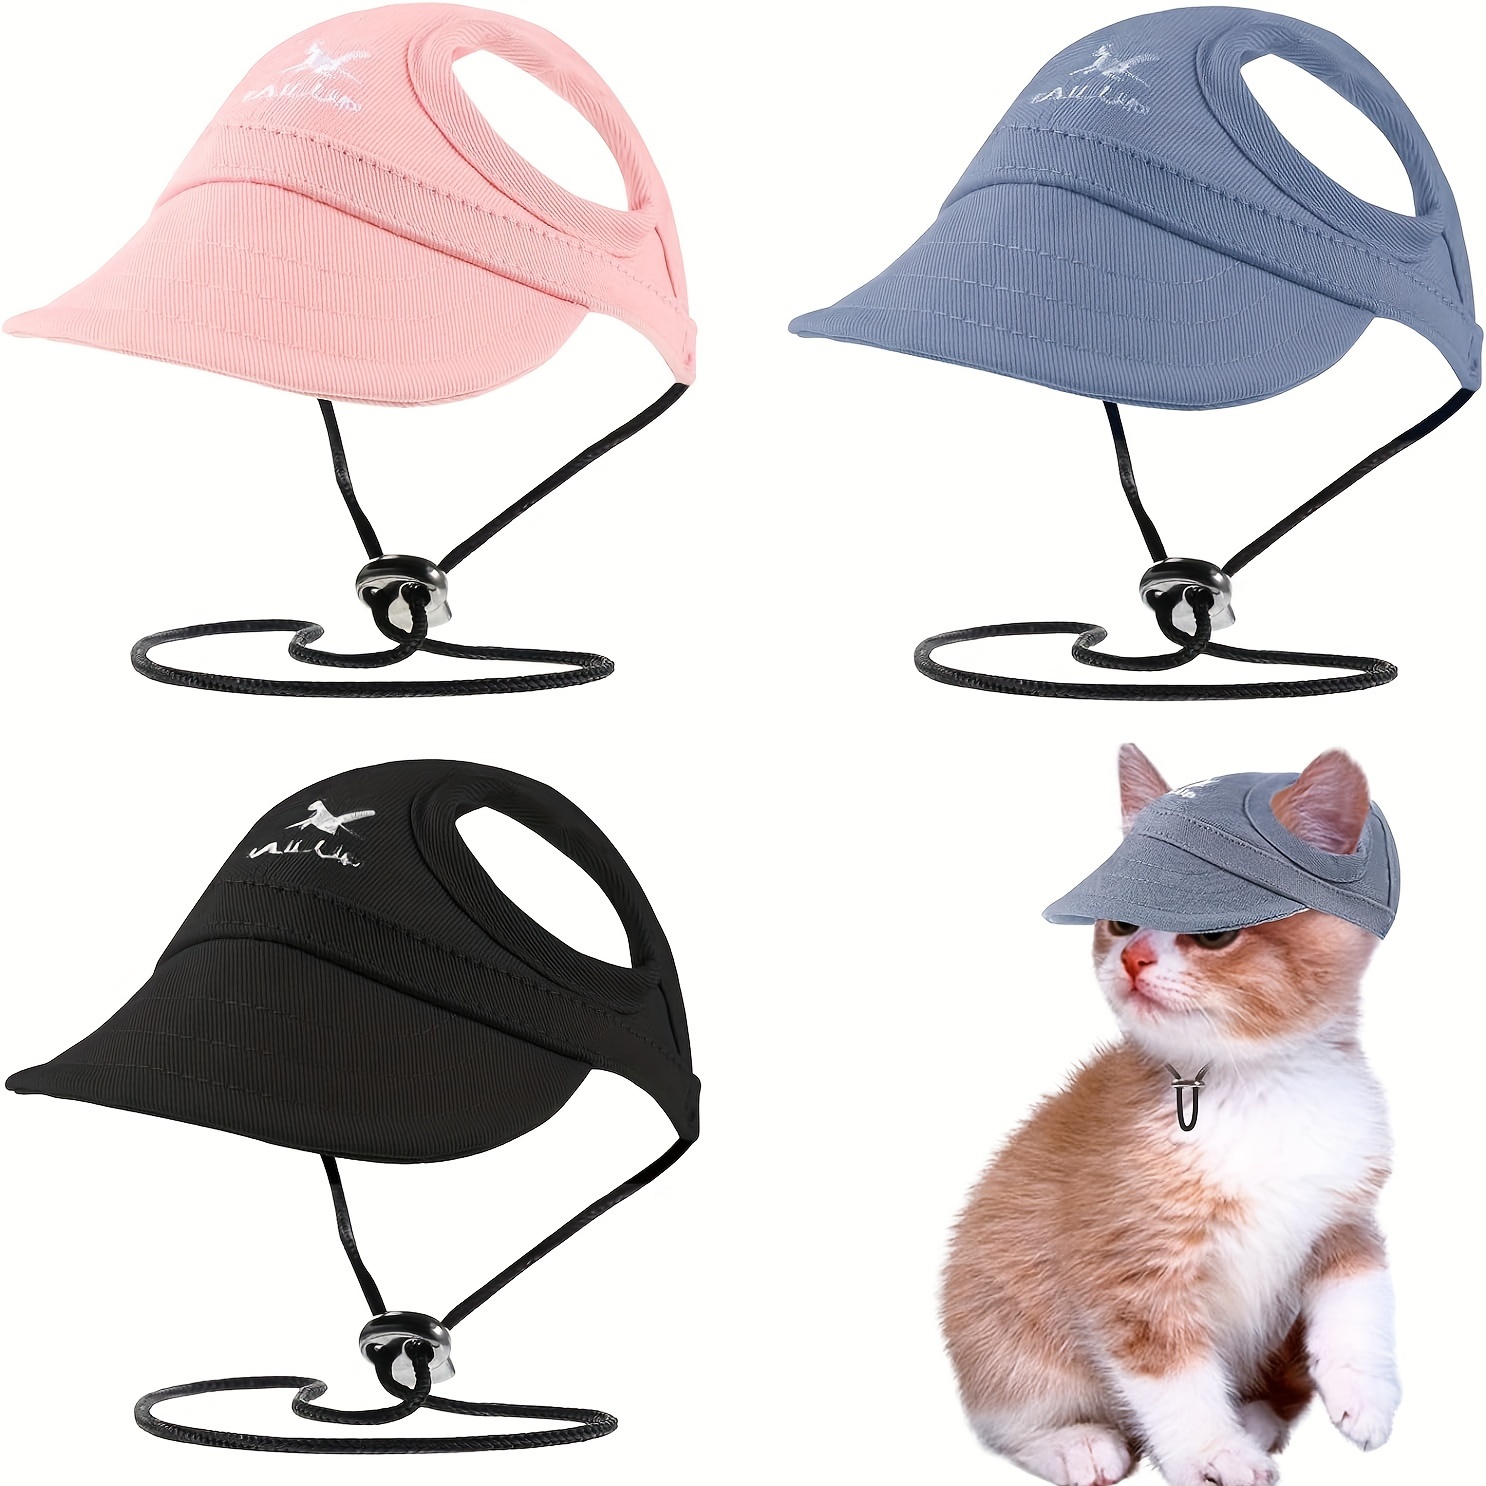 Sphynx Cat Bucket Hat With Ear Holes, Hairless Cat Summer Hat, Cat  Sunbonnet Outdoor Visor Hat, Sun Protection Cap Travel Hiking Hat for Pet 